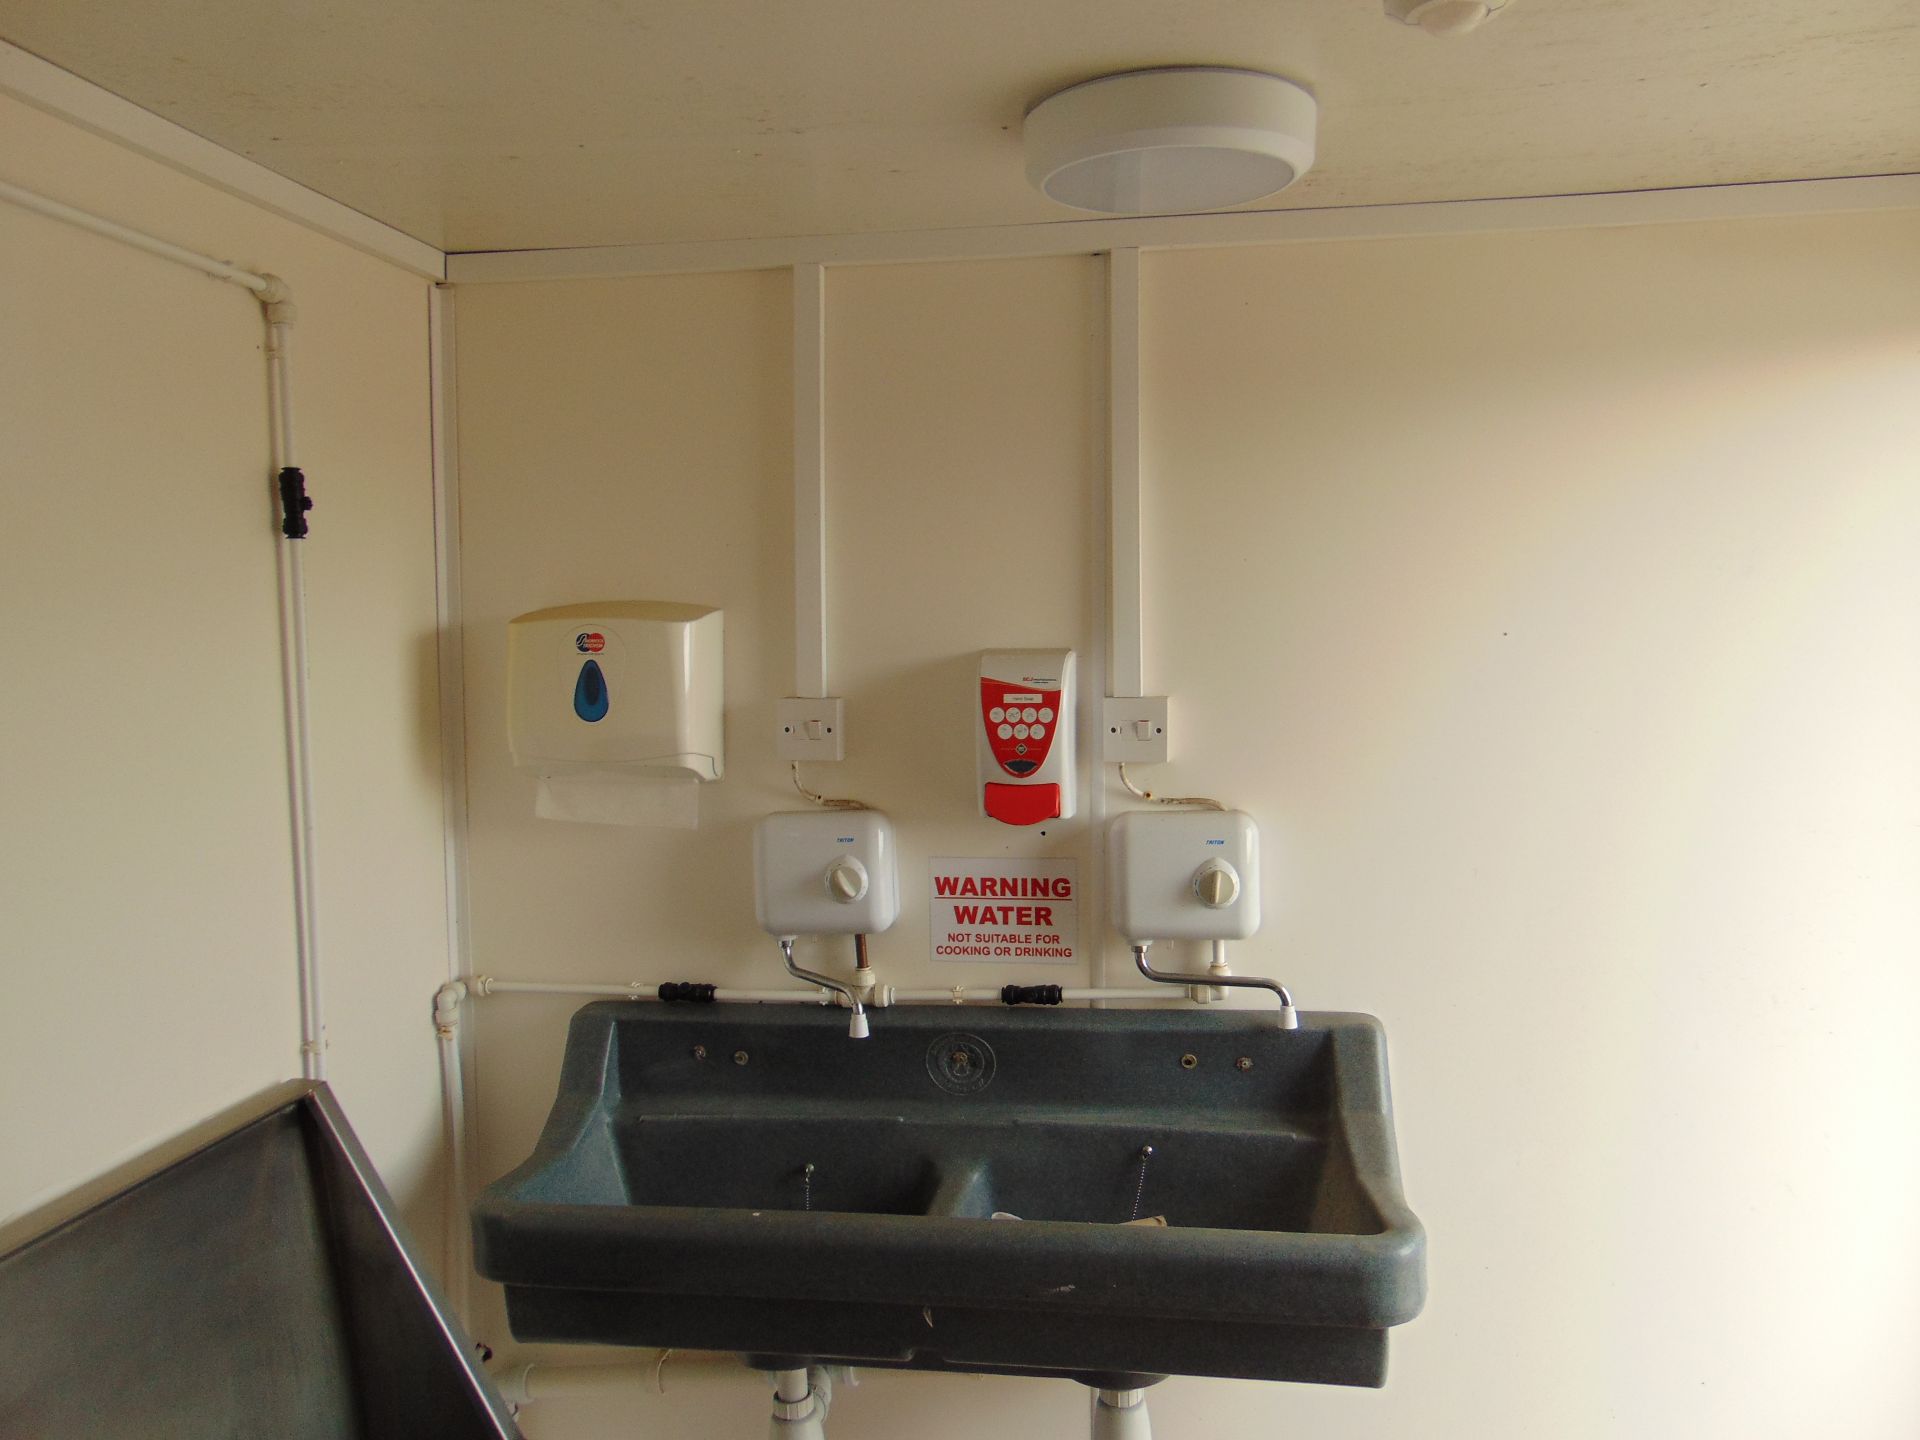 Male / Female Dual Compartment Toilet Block - Image 17 of 23